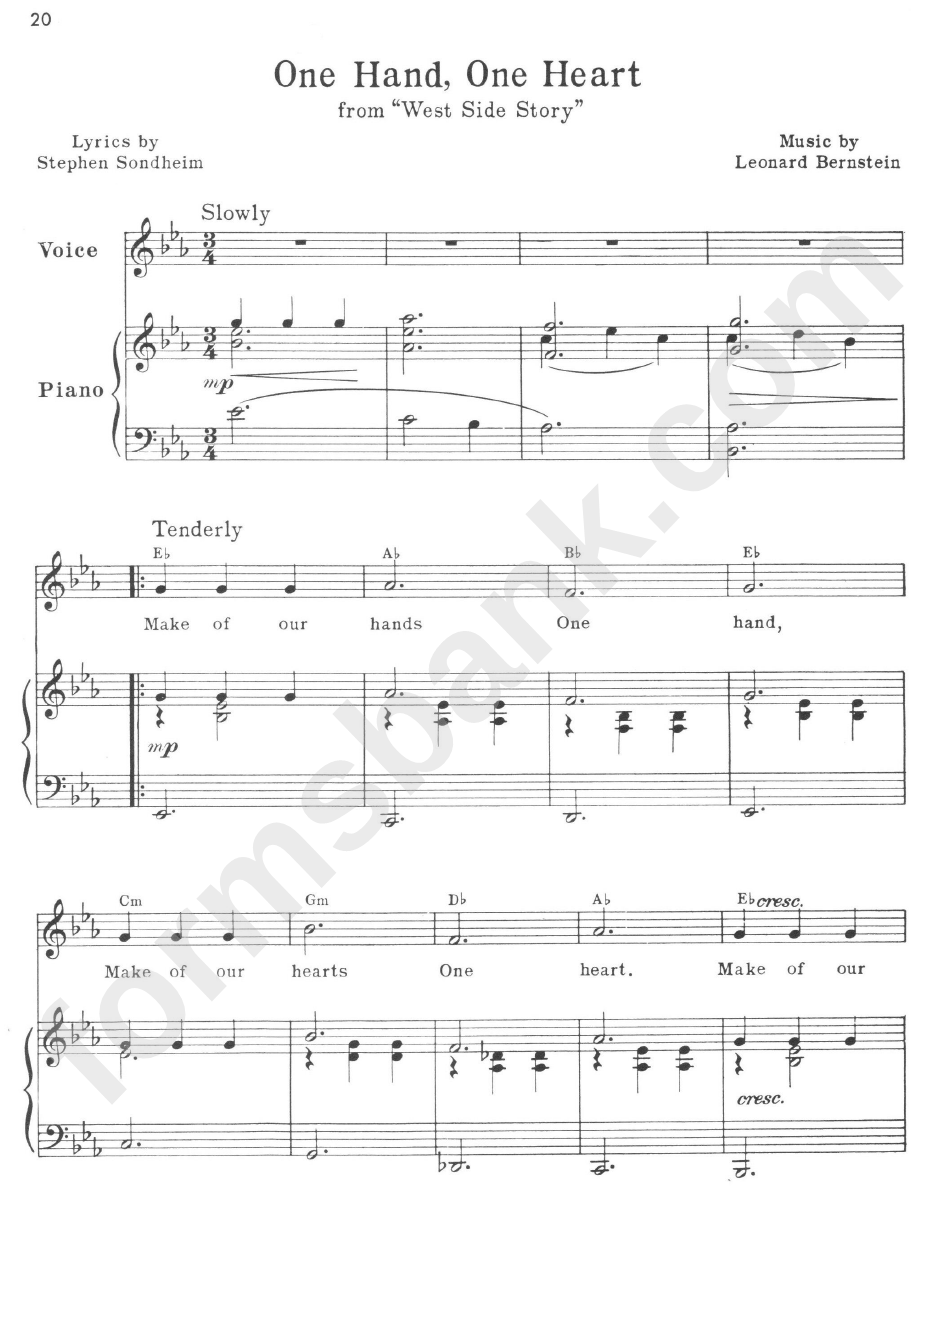 Gina Sanders - One Hand, One Heart (West Side Story) Sheet Music